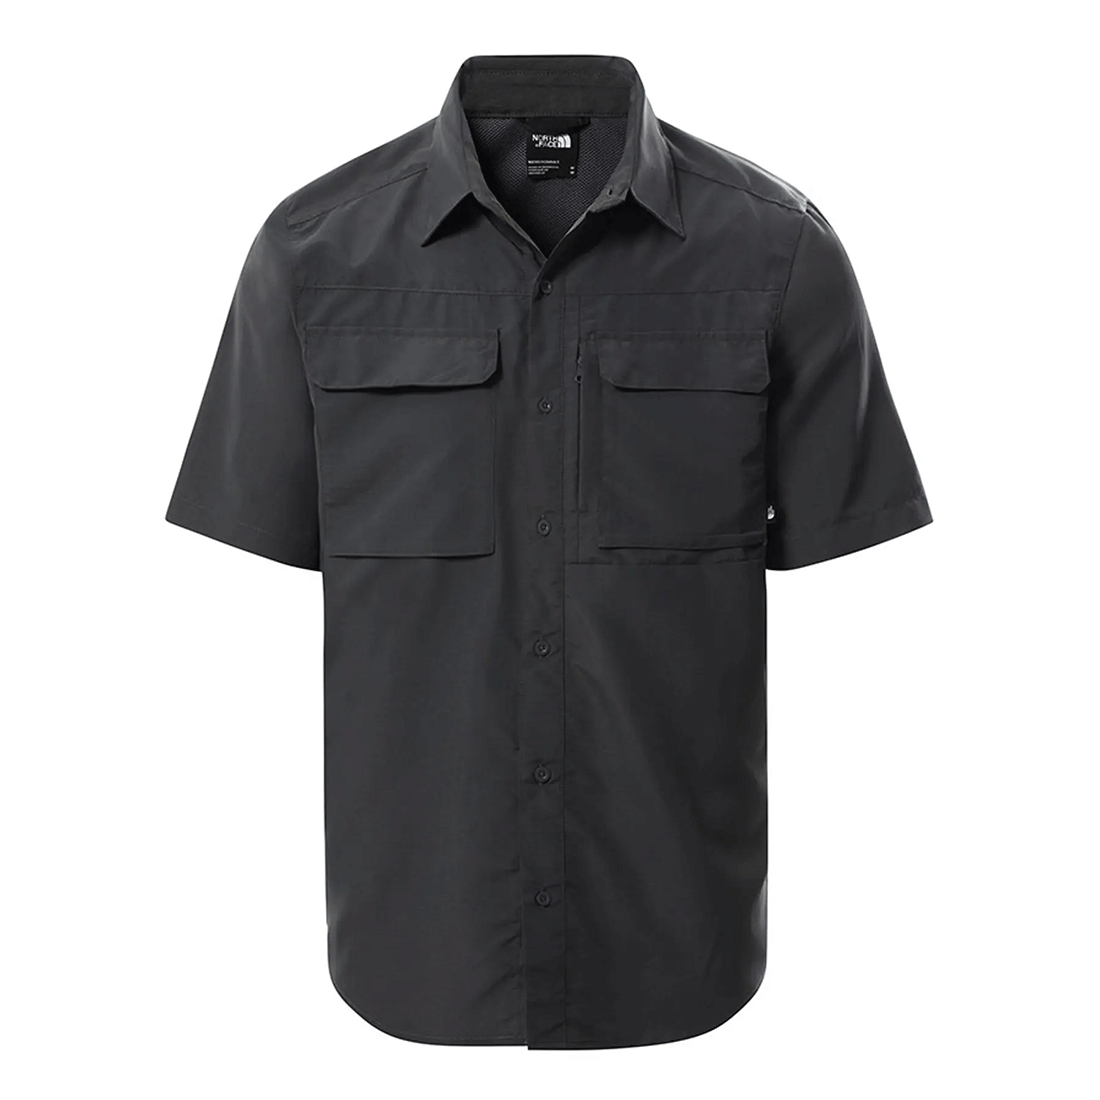 Shirt in The North Face technical fabric - Sequoia Shirt - Grey